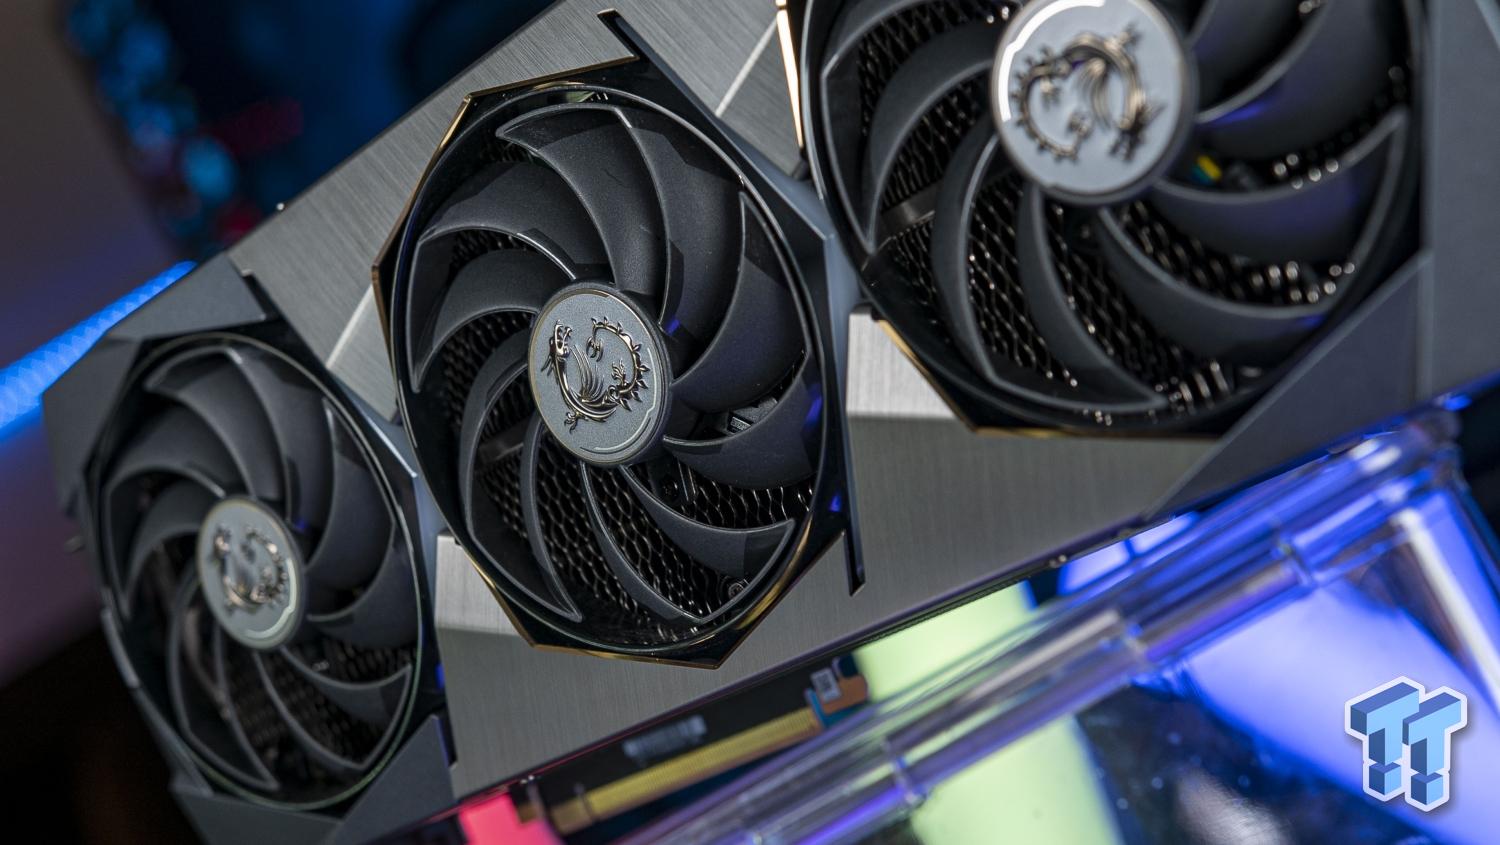 Nvidia RTX 4080 graphics card TDP rumored near 3090 Ti levels of power